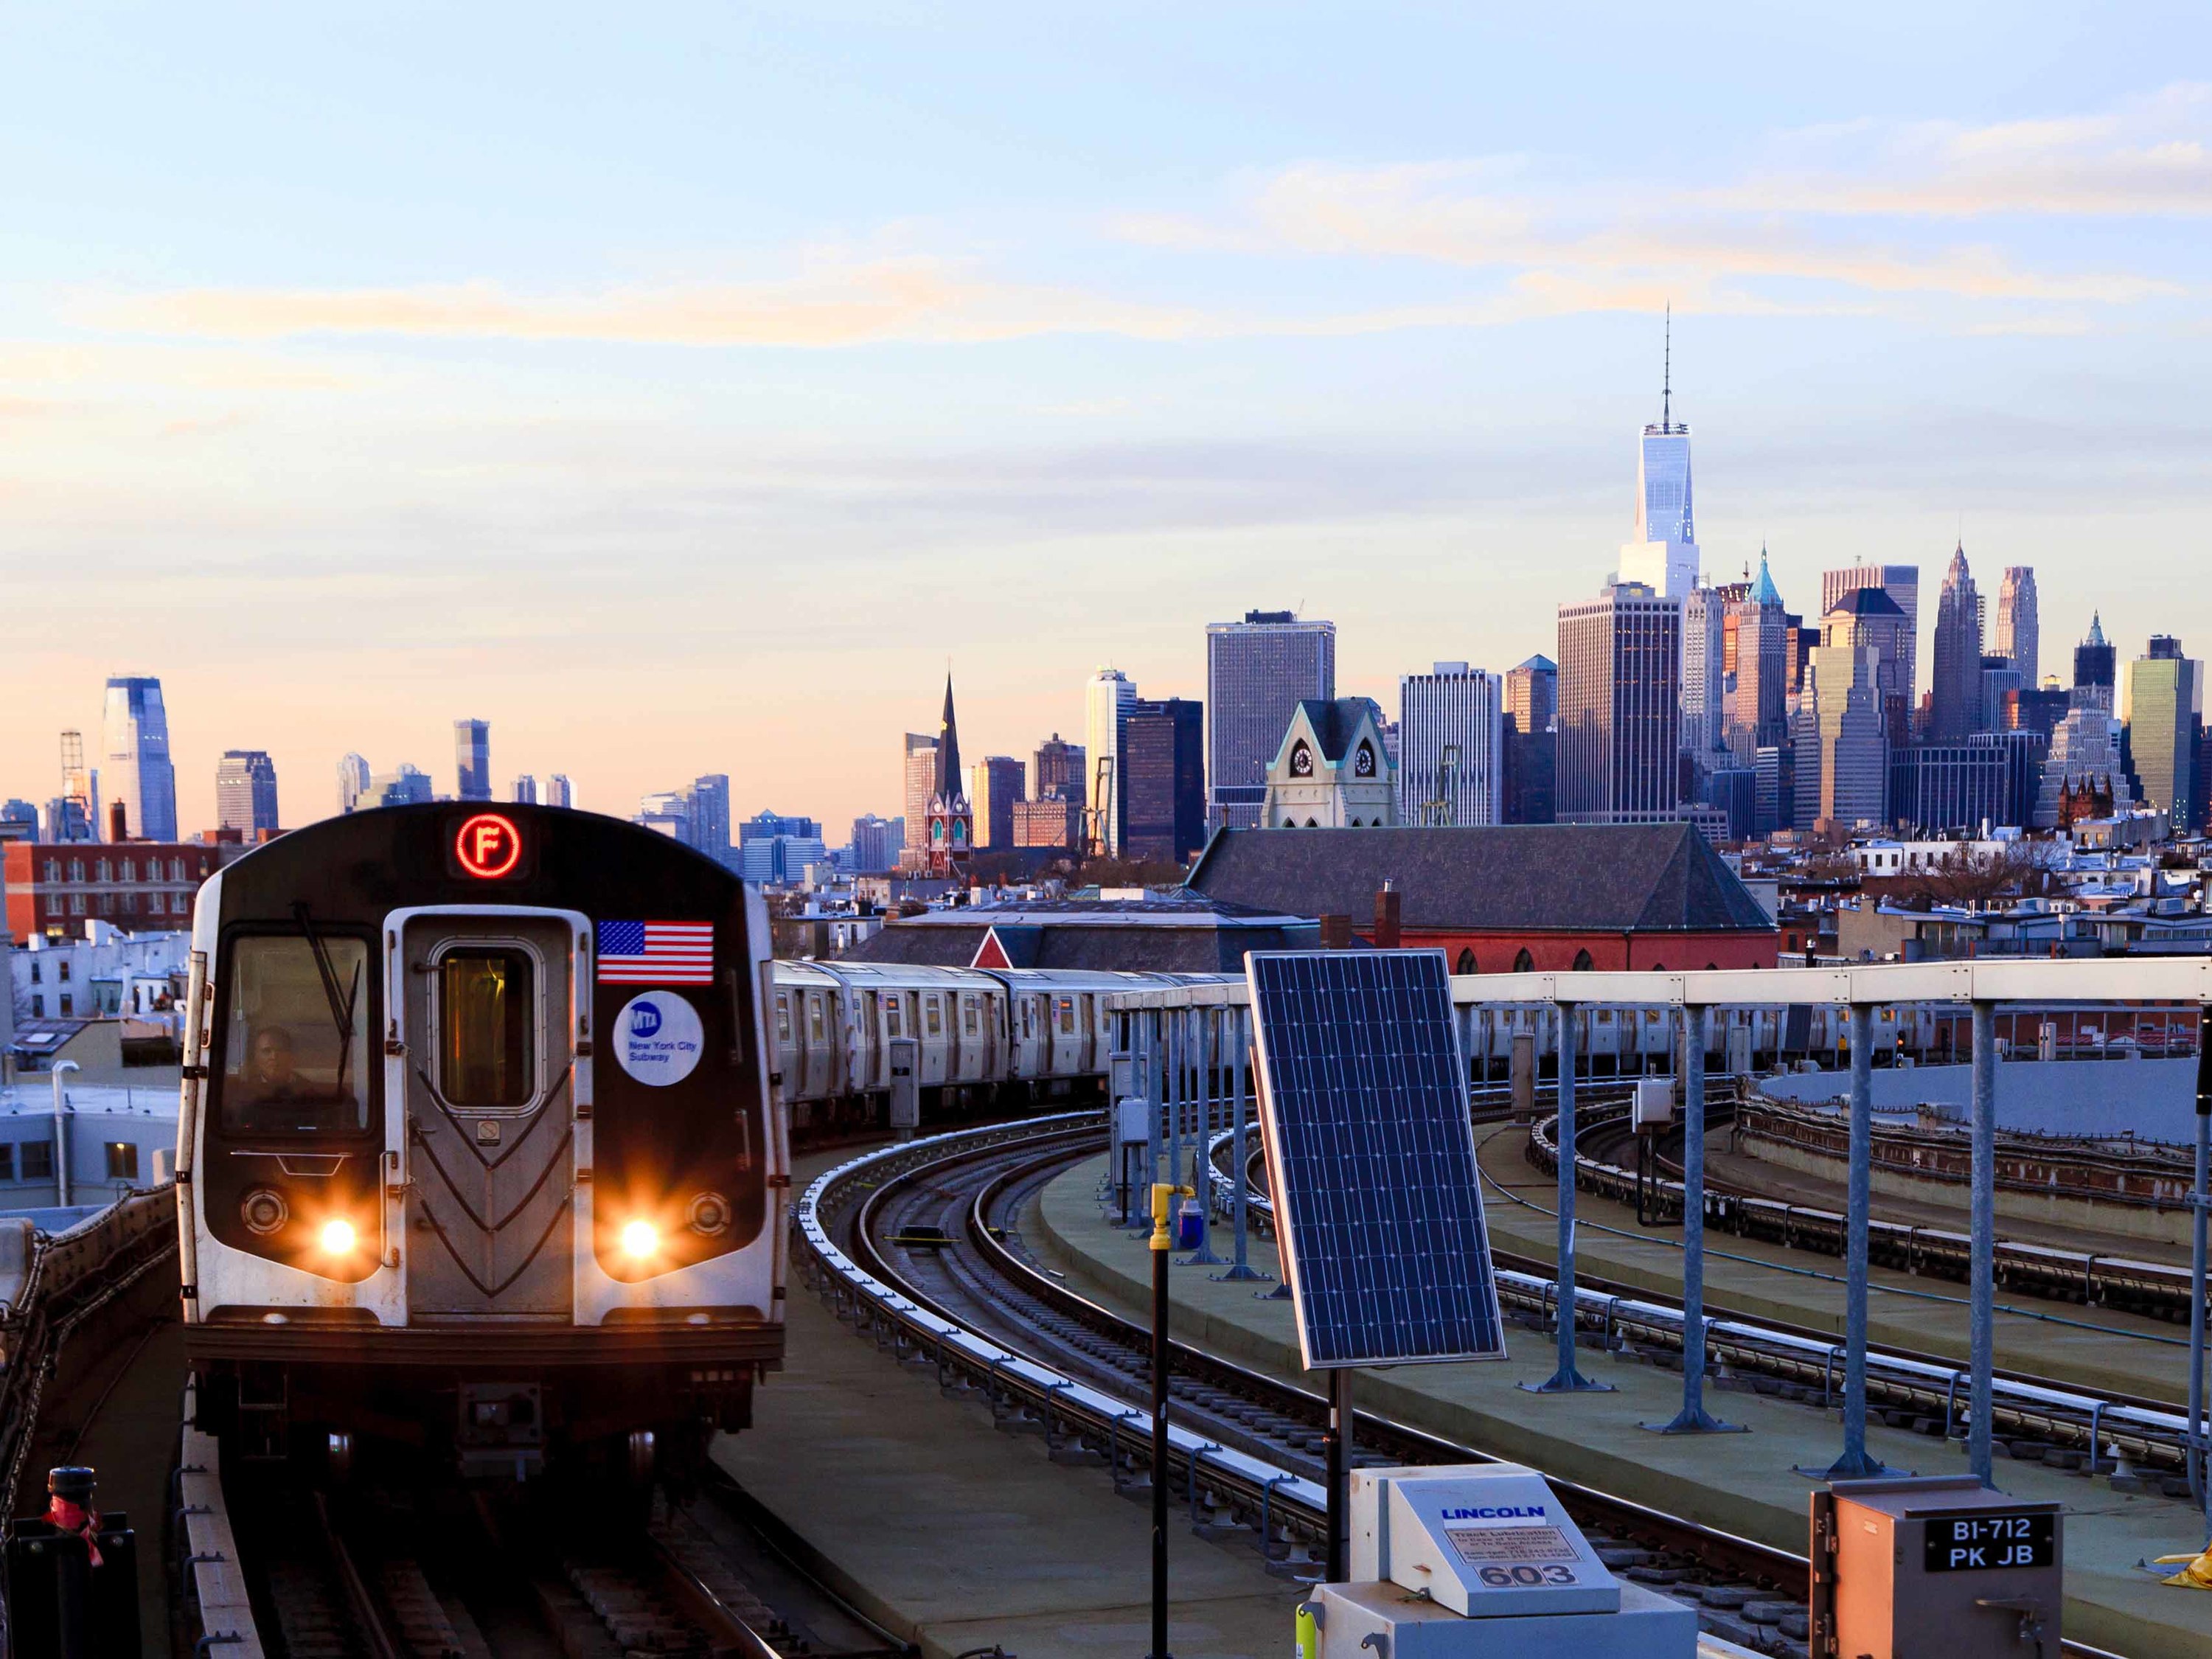 mta trip planner point to point